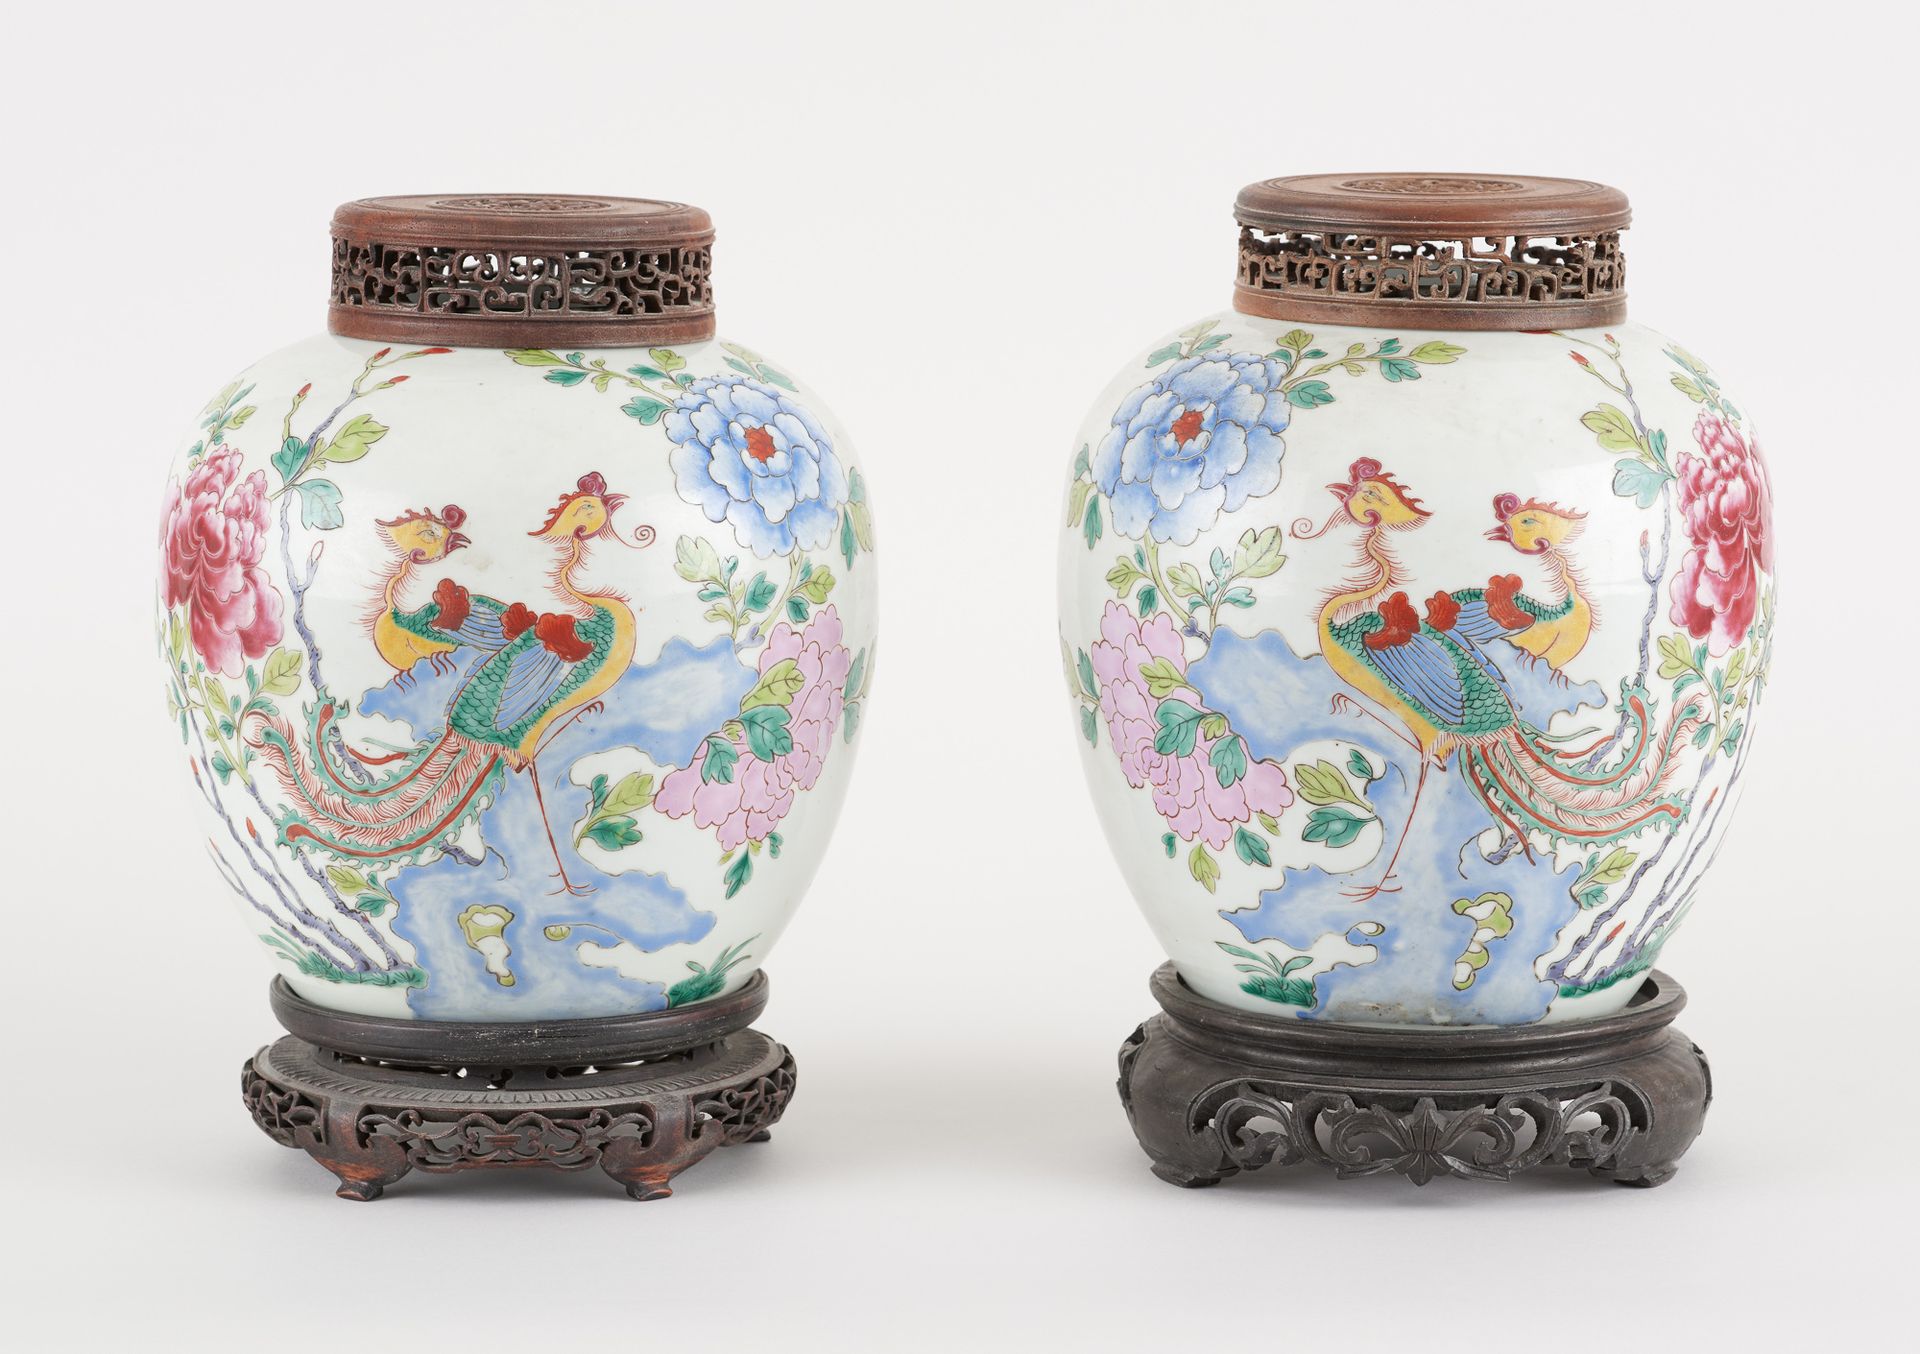 Travail chinois 19e. Ceramic: Pair of ginger pots in polychrome porcelain decora&hellip;